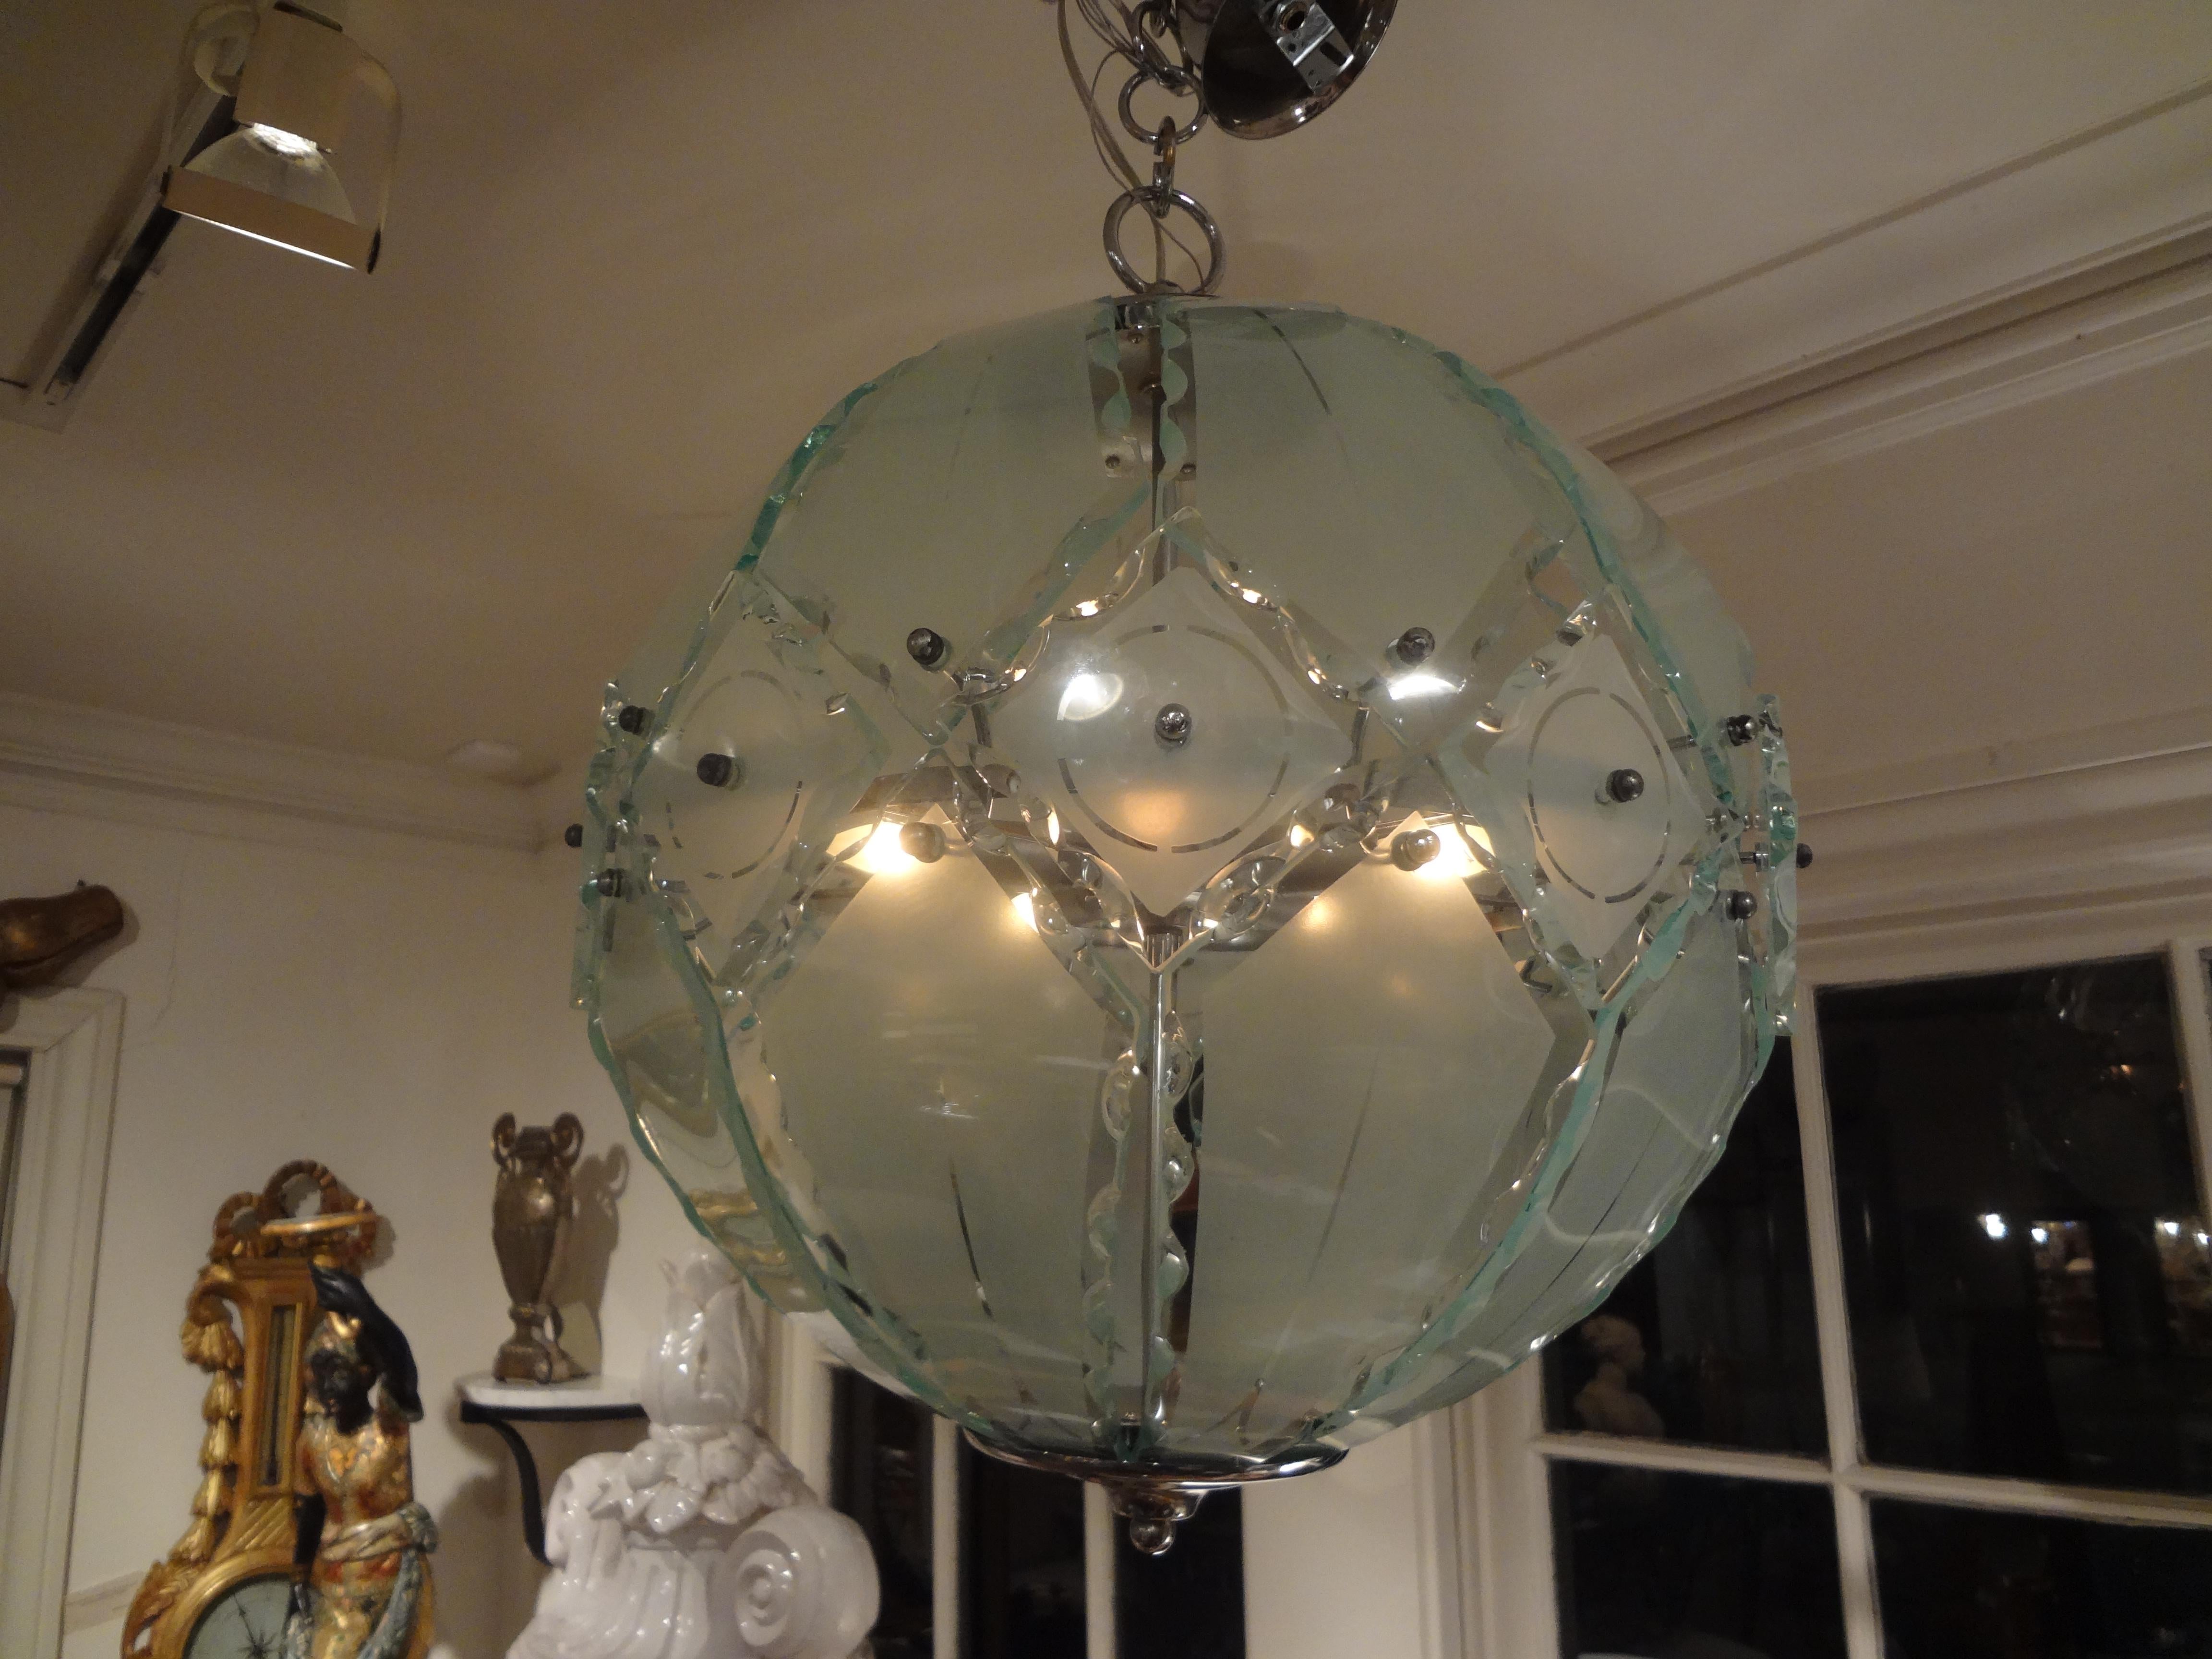 Italian zero Quattro-Fontana Arte frosted glass sphere pendant.
Chic Italian Mid-Century Modern sandblasted glass lantern style sphere chandelier or pendant with chrome structure. This Italian lantern style glass fixture was made by 04 (Zero